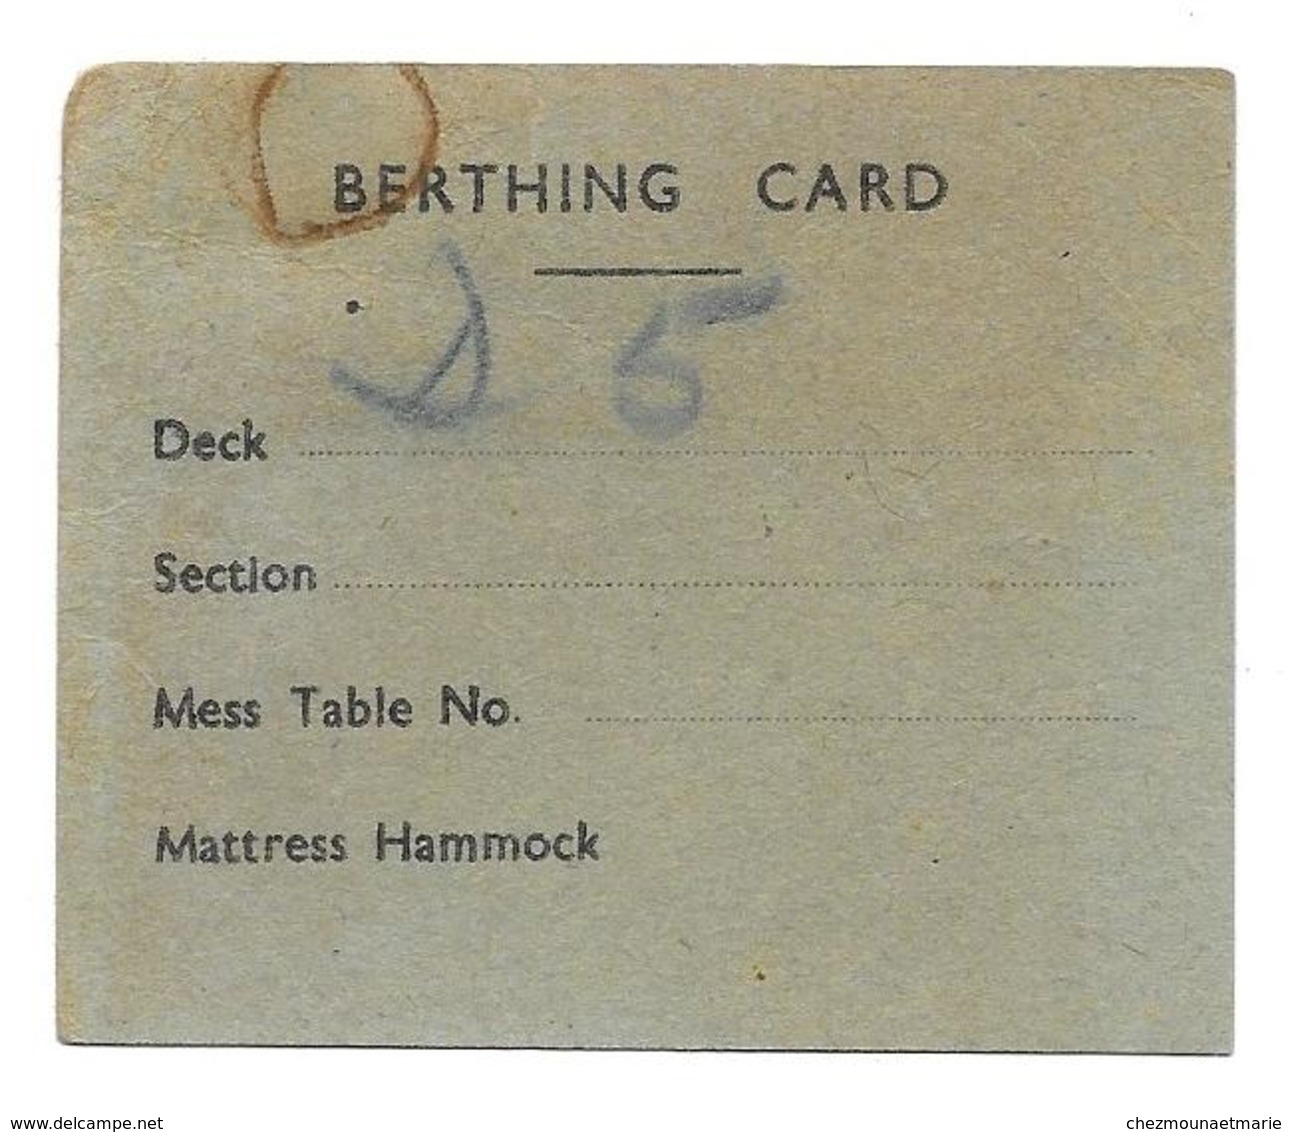 BERTHING CARD - N°5 BOAT DECK AFT N°3 HATCH - FIRE STATION BOAT SATATION - MILITAIRE - Schiffe